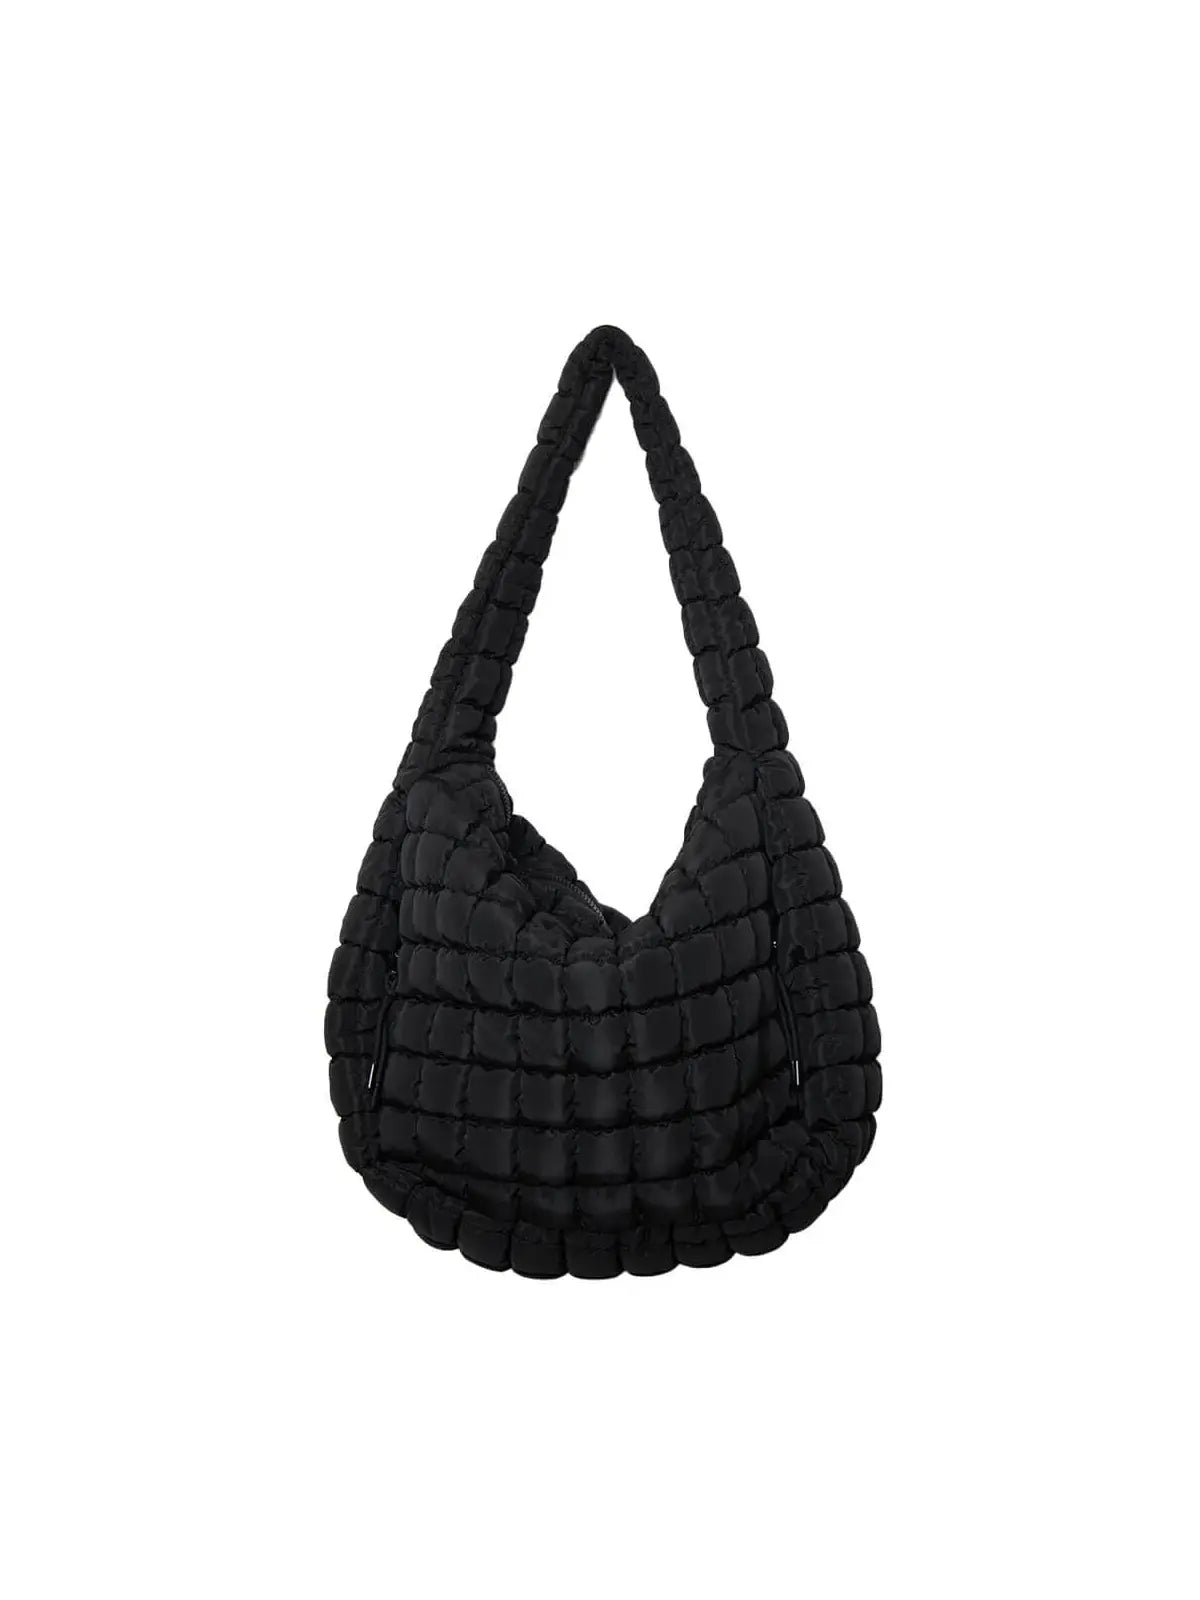 katydid free people dupe oversized quilted puffer hobo tote bag in black